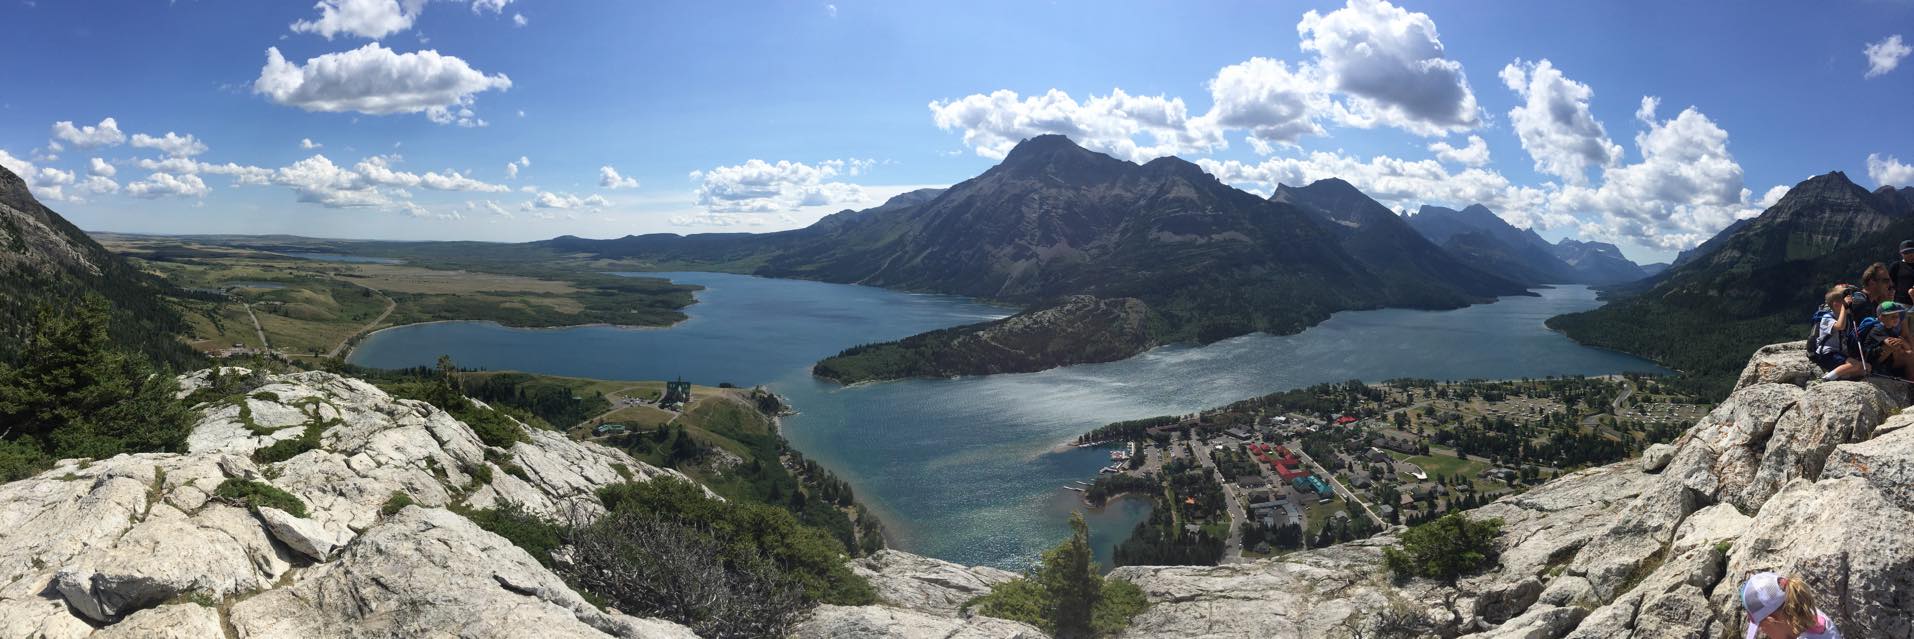 View of town from the end of a hike in Waterton Lakes National Park 